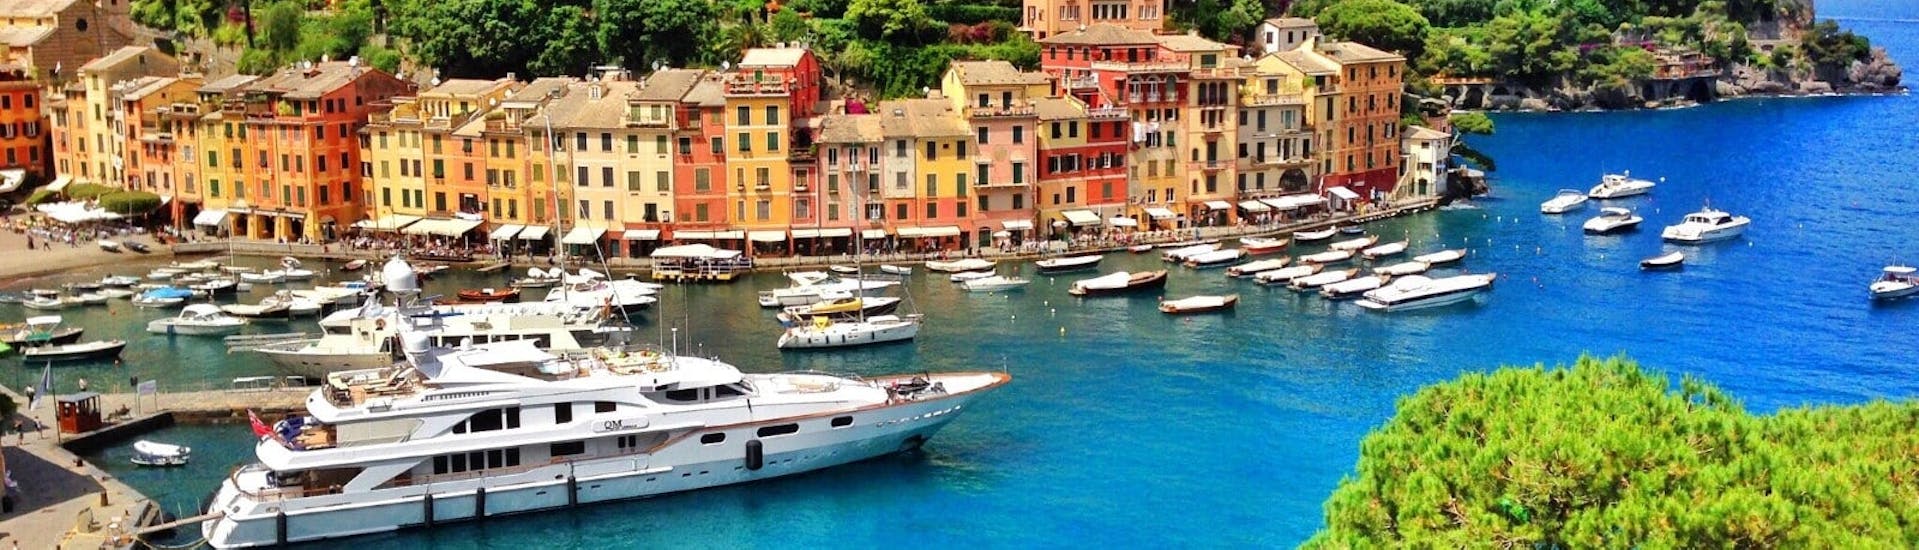 Private Boat Trip from La Spezia to Tellaro and Lerici with Lunch & Snorkeling.